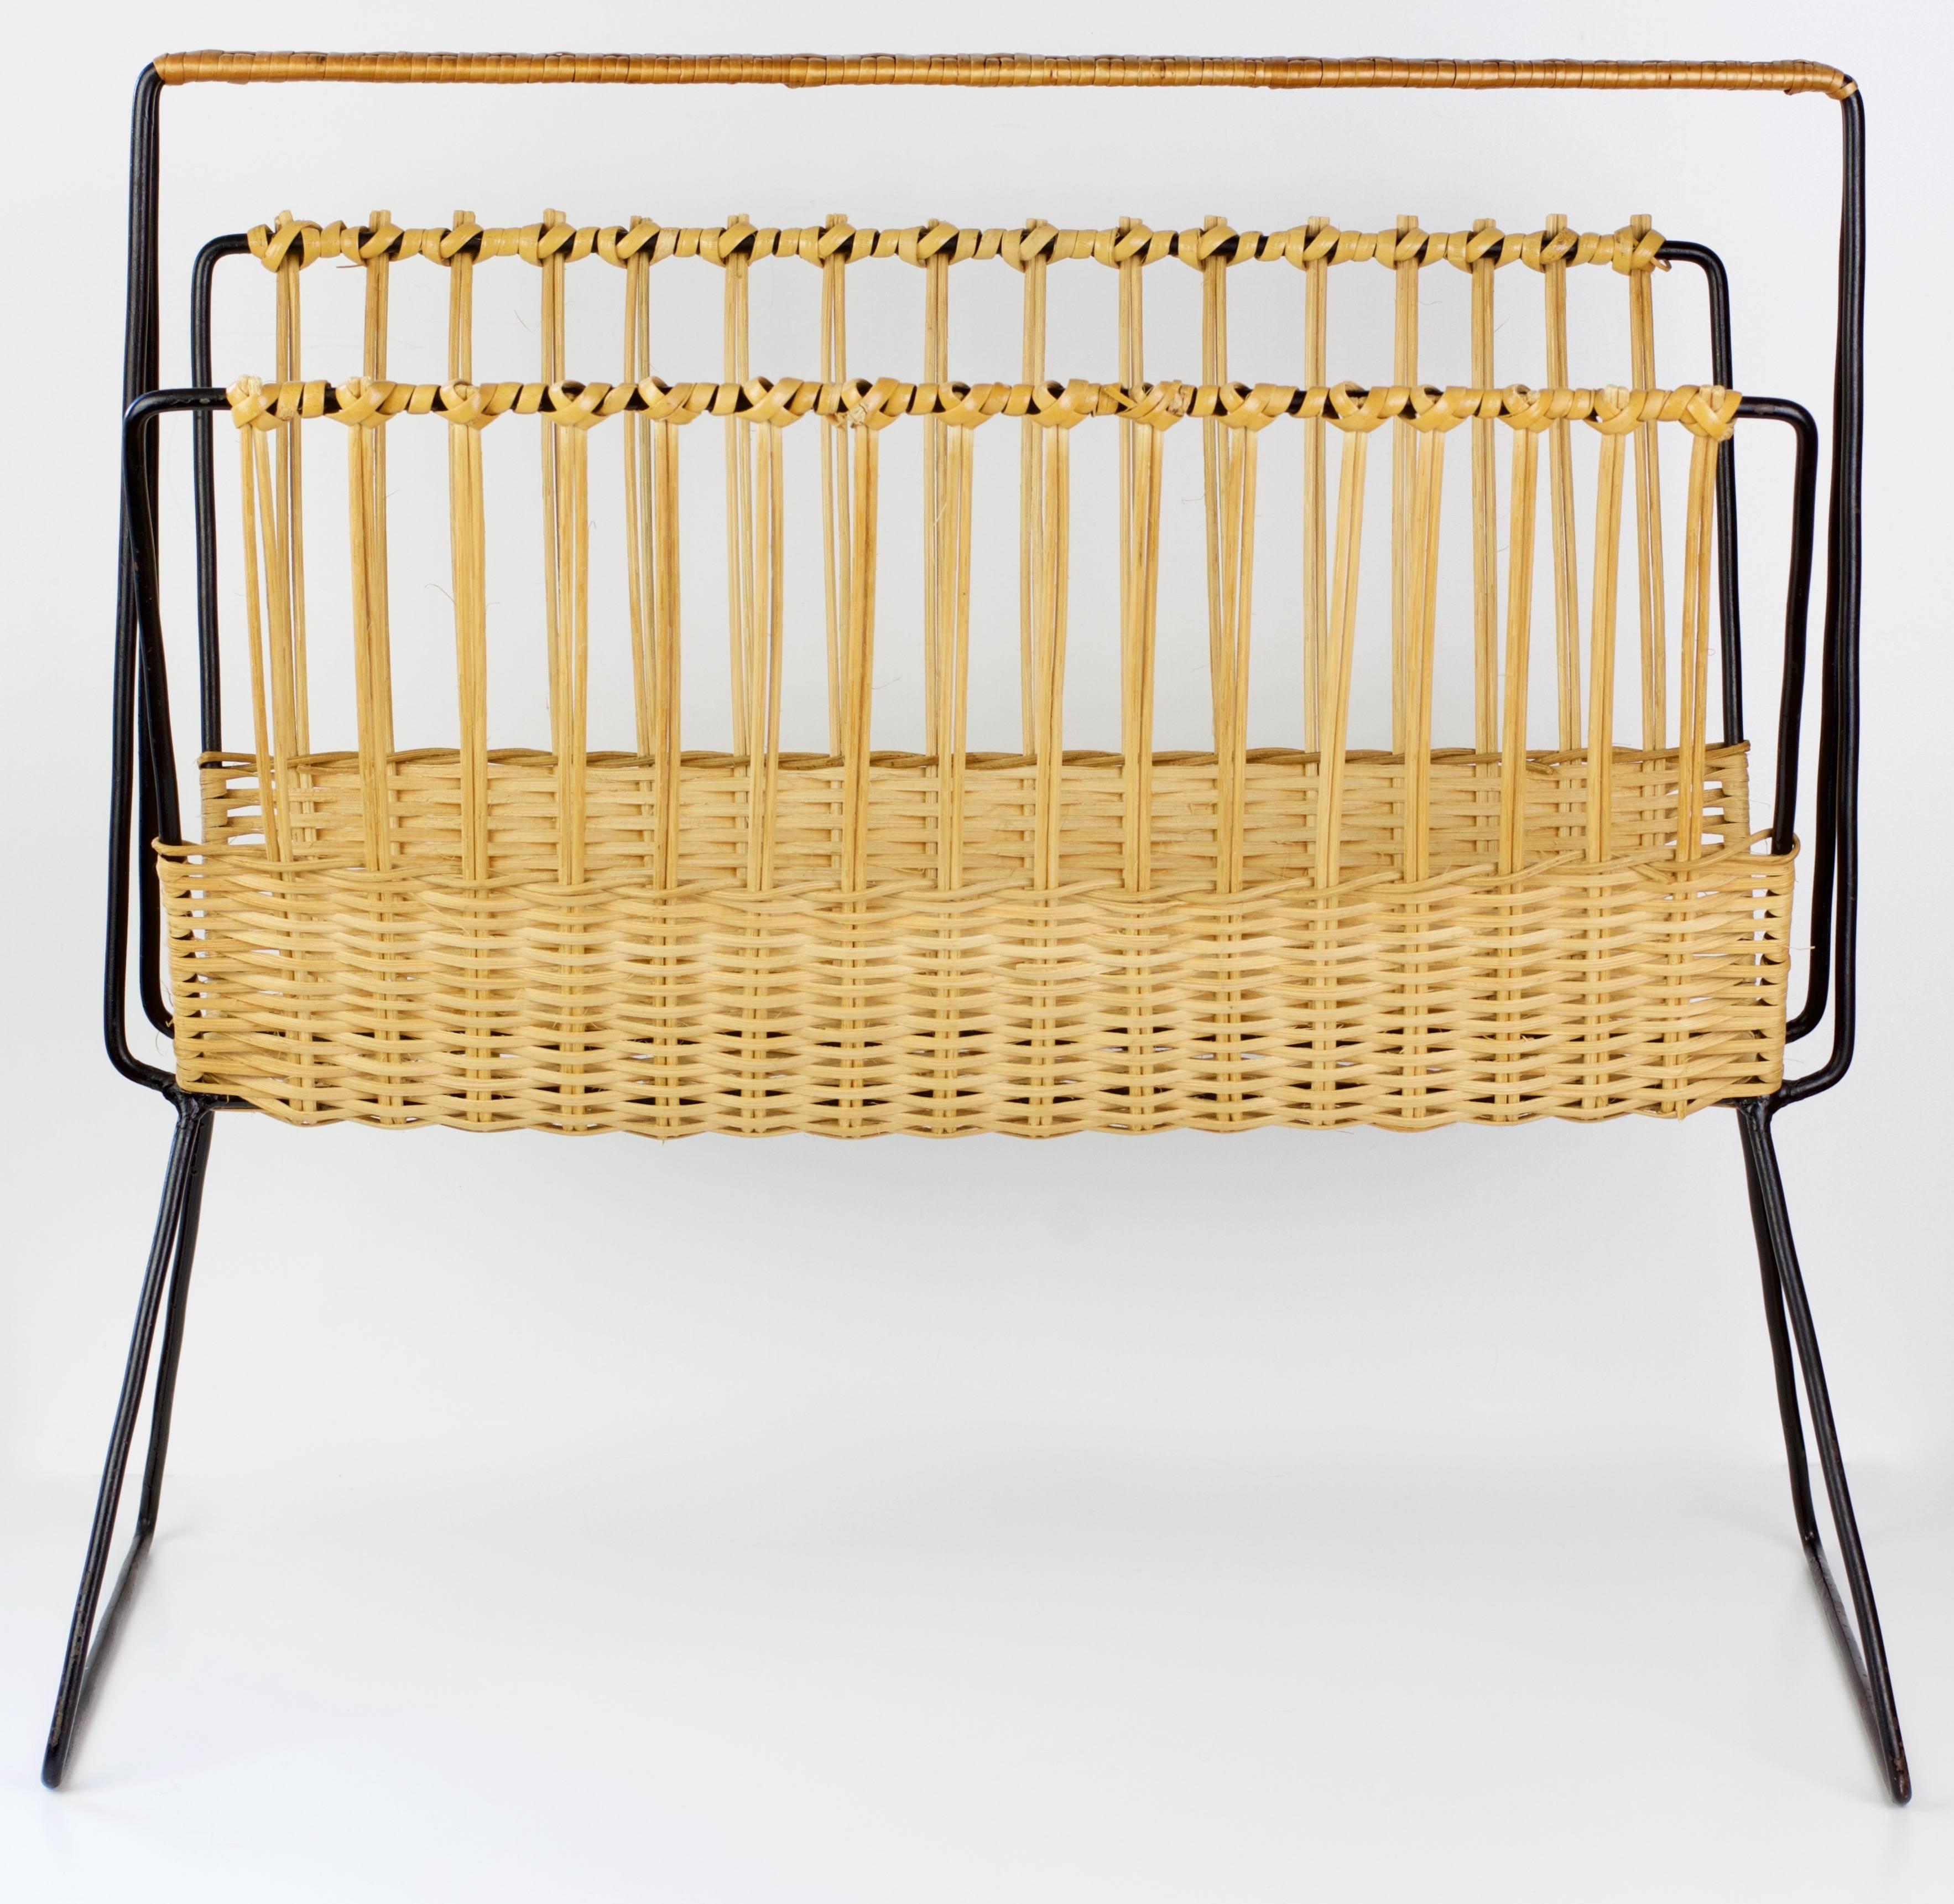 This large magazine stand / holder was made in Holland by Dutch Company Rohe Noordwolde, circa 1958. The blonde woven wicker / rattan wraps around the black enameled steel wire frame creating, what is, a wonderfully minimal, modernist piece of